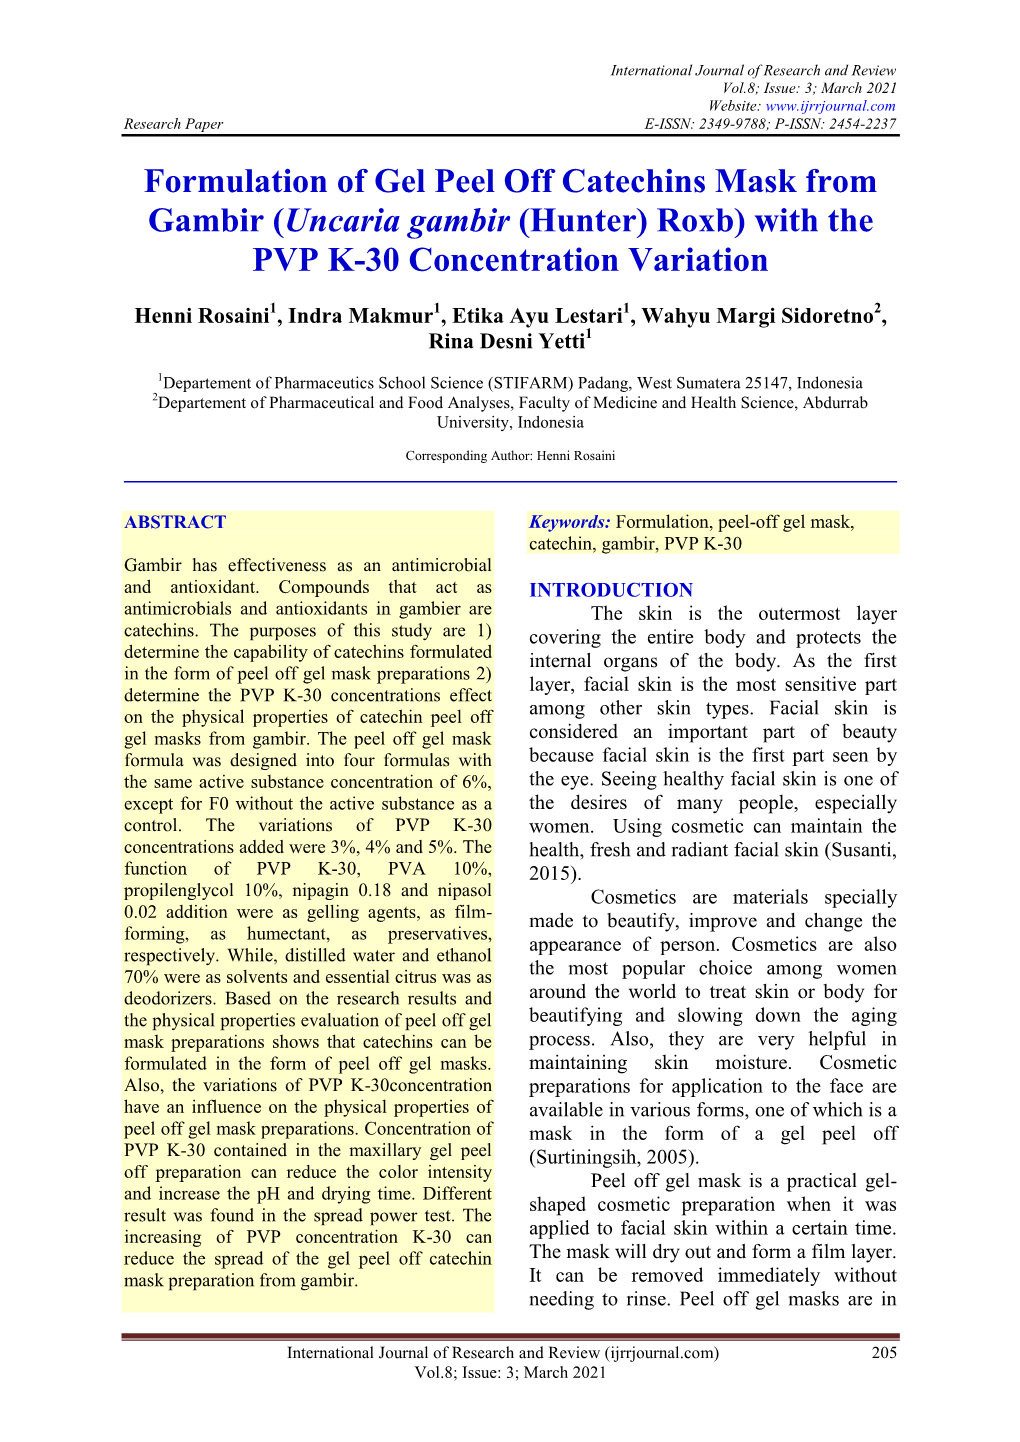 Formulation of Gel Peel Off Catechins Mask from Gambir (Uncaria Gambir (Hunter) Roxb) with the PVP K-30 Concentration Variation